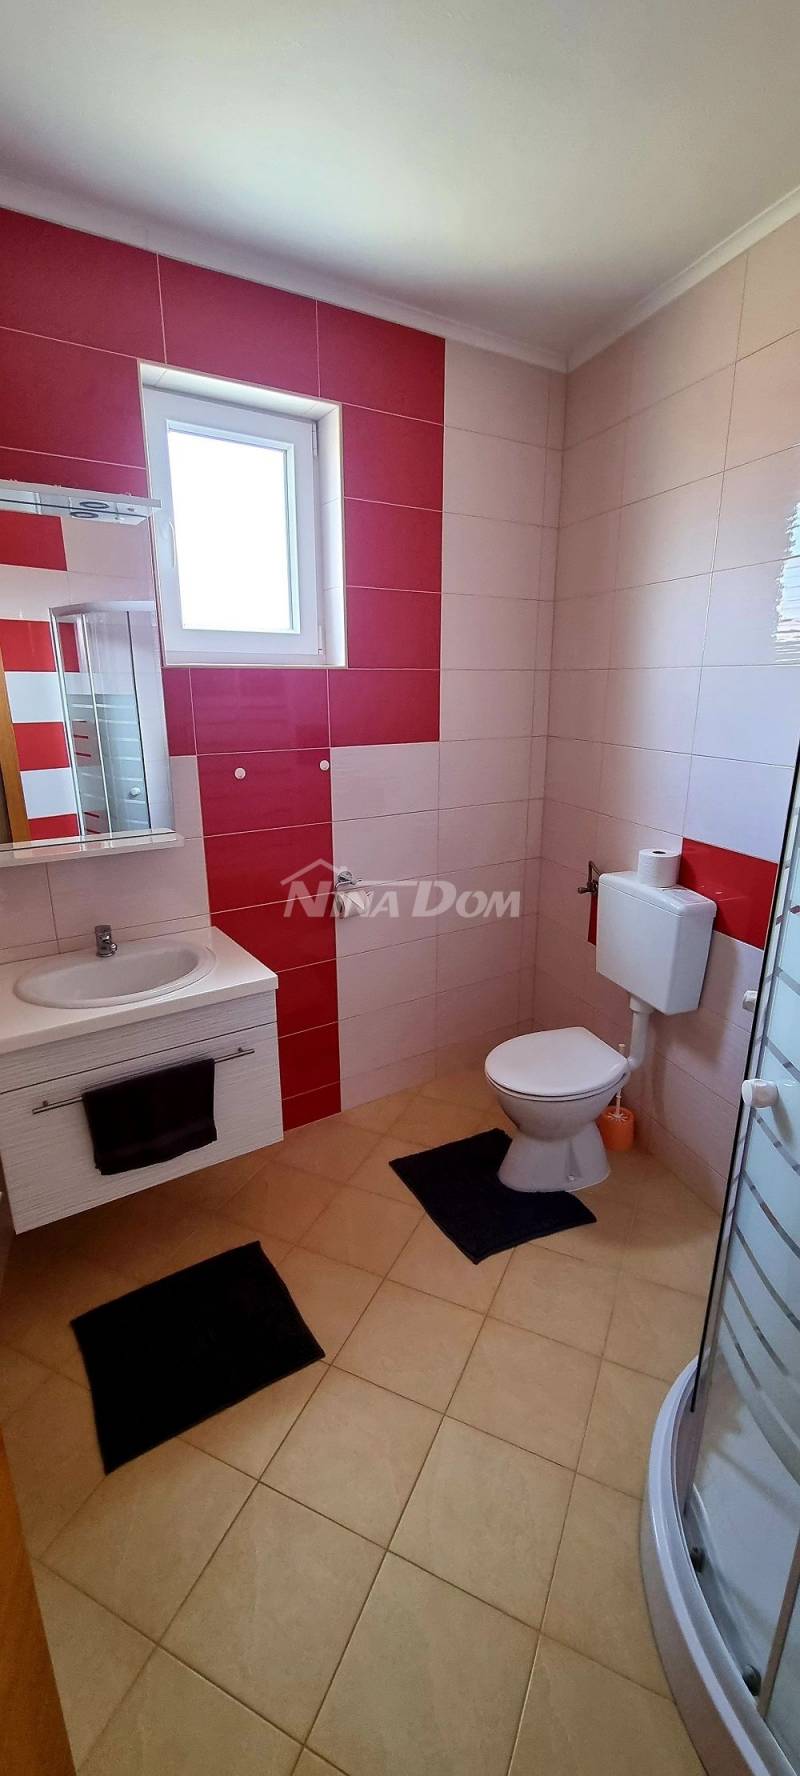 Property with two storey apartments 80 meters from the sea. - 15